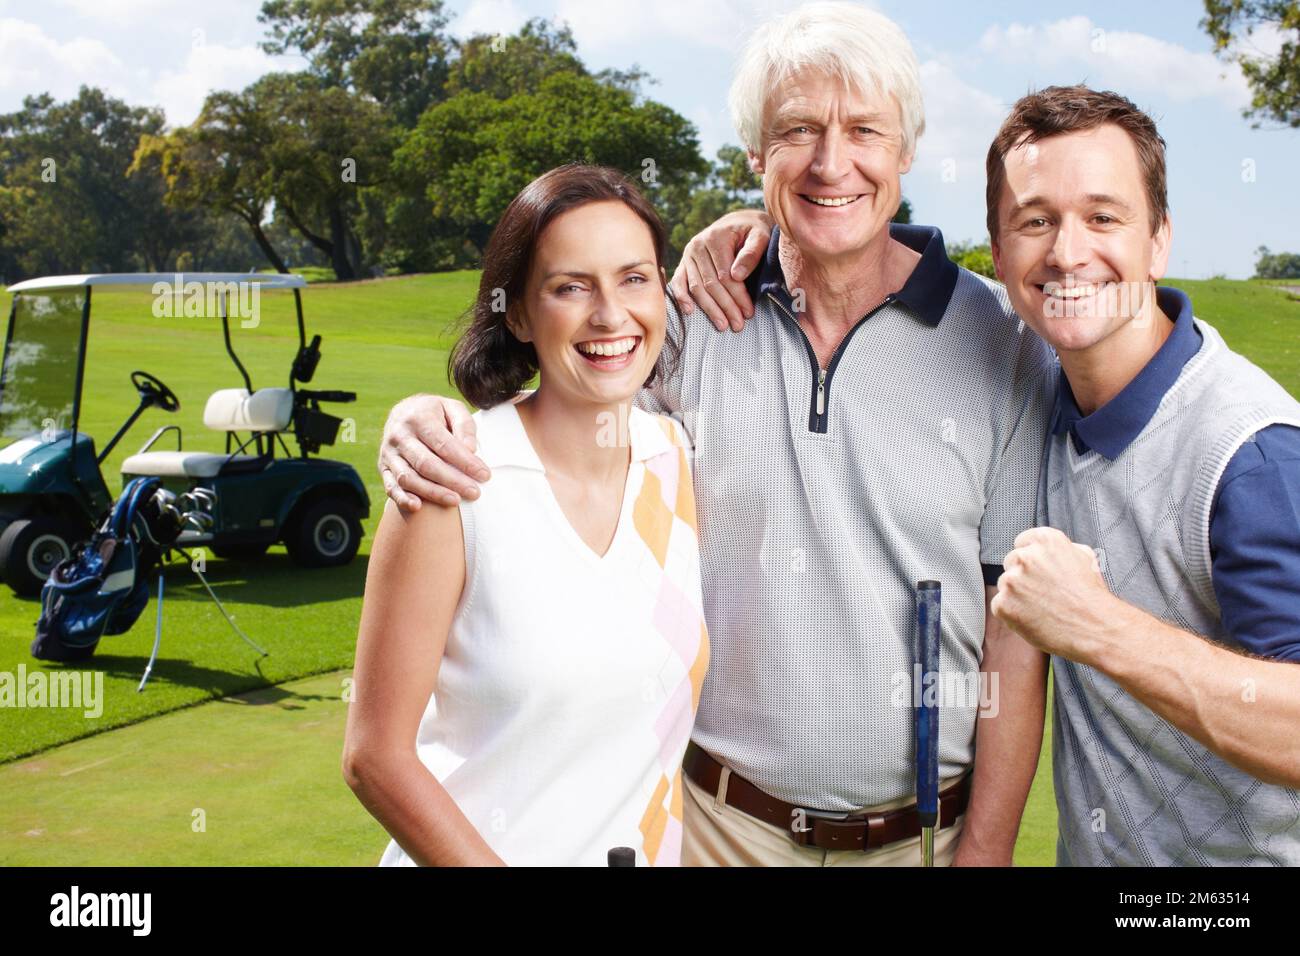 Family day on the green. Smiling golfing companions on the green with their golf cart in the background. Stock Photo